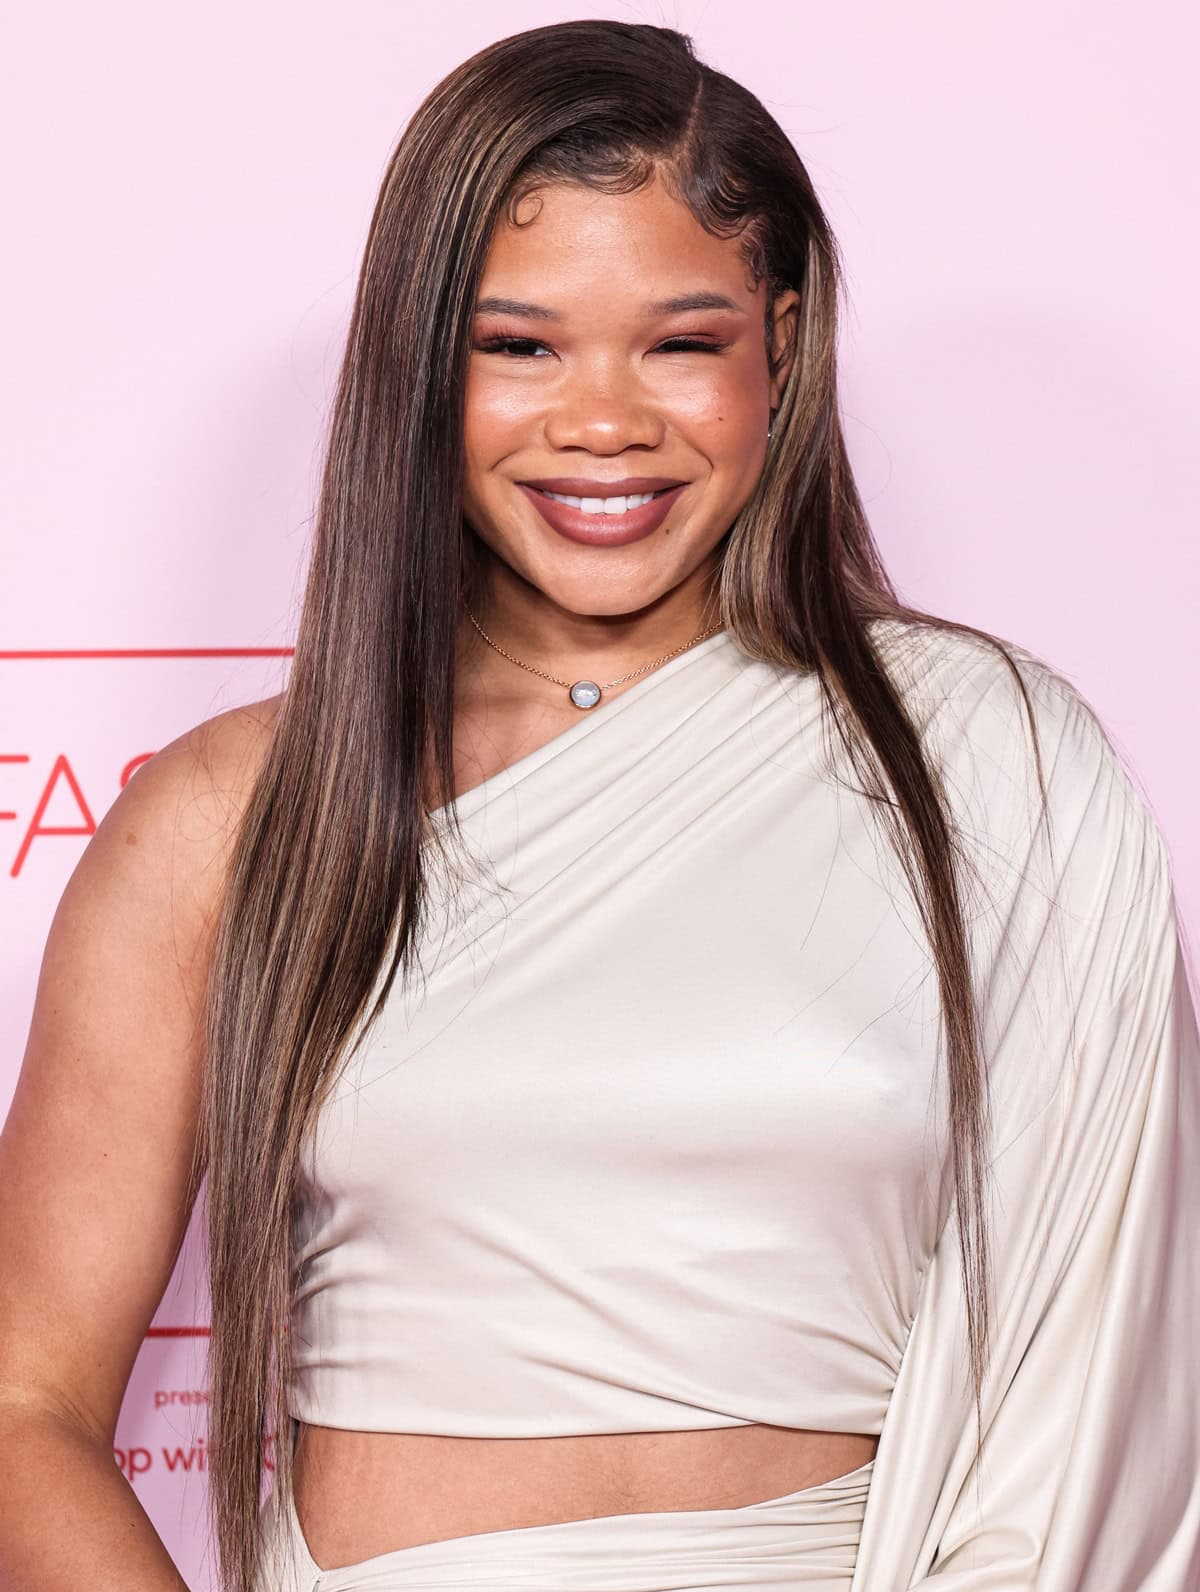 Storm Reid adorned herself with a striking gold Pomellato Pom Pom Dot necklace, adding a glamorous focal point to her outfit